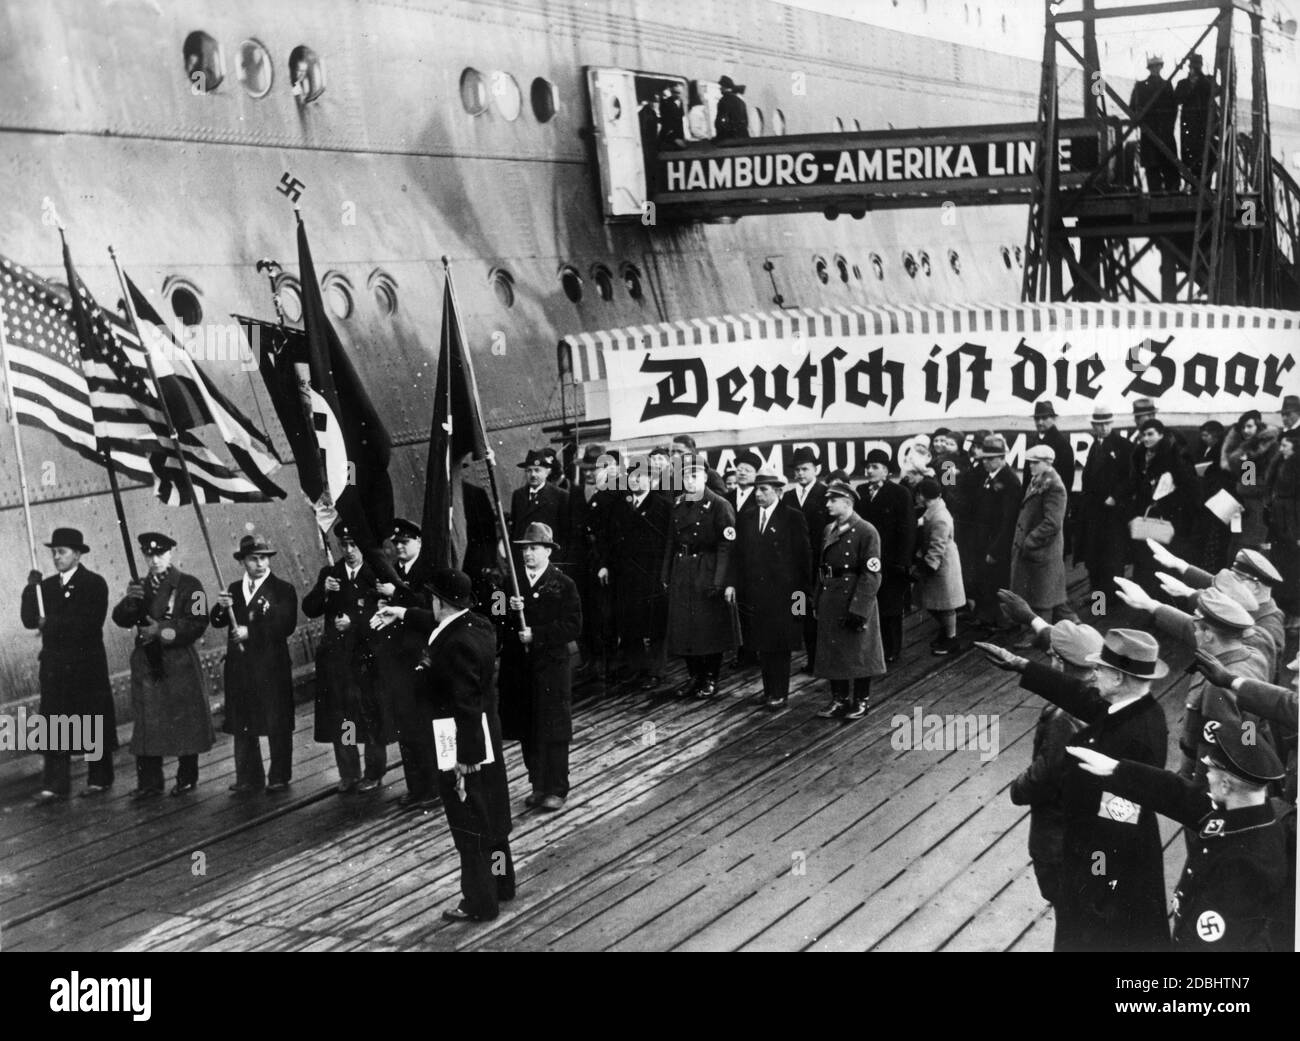 'The passenger steamer ''Deutschland'' of the Hamburg - Amerika Line arrived in Cuxhaven with 358 Saar Germans from America who came to participate in the referendum on the annexation of the Saar region to the German Reich. At the landing pier they are received by National Socialist organizations. The picture shows the people of Saarland with their association banner (''The Saar is German!''), American national flags and swastika flags.' Stock Photo